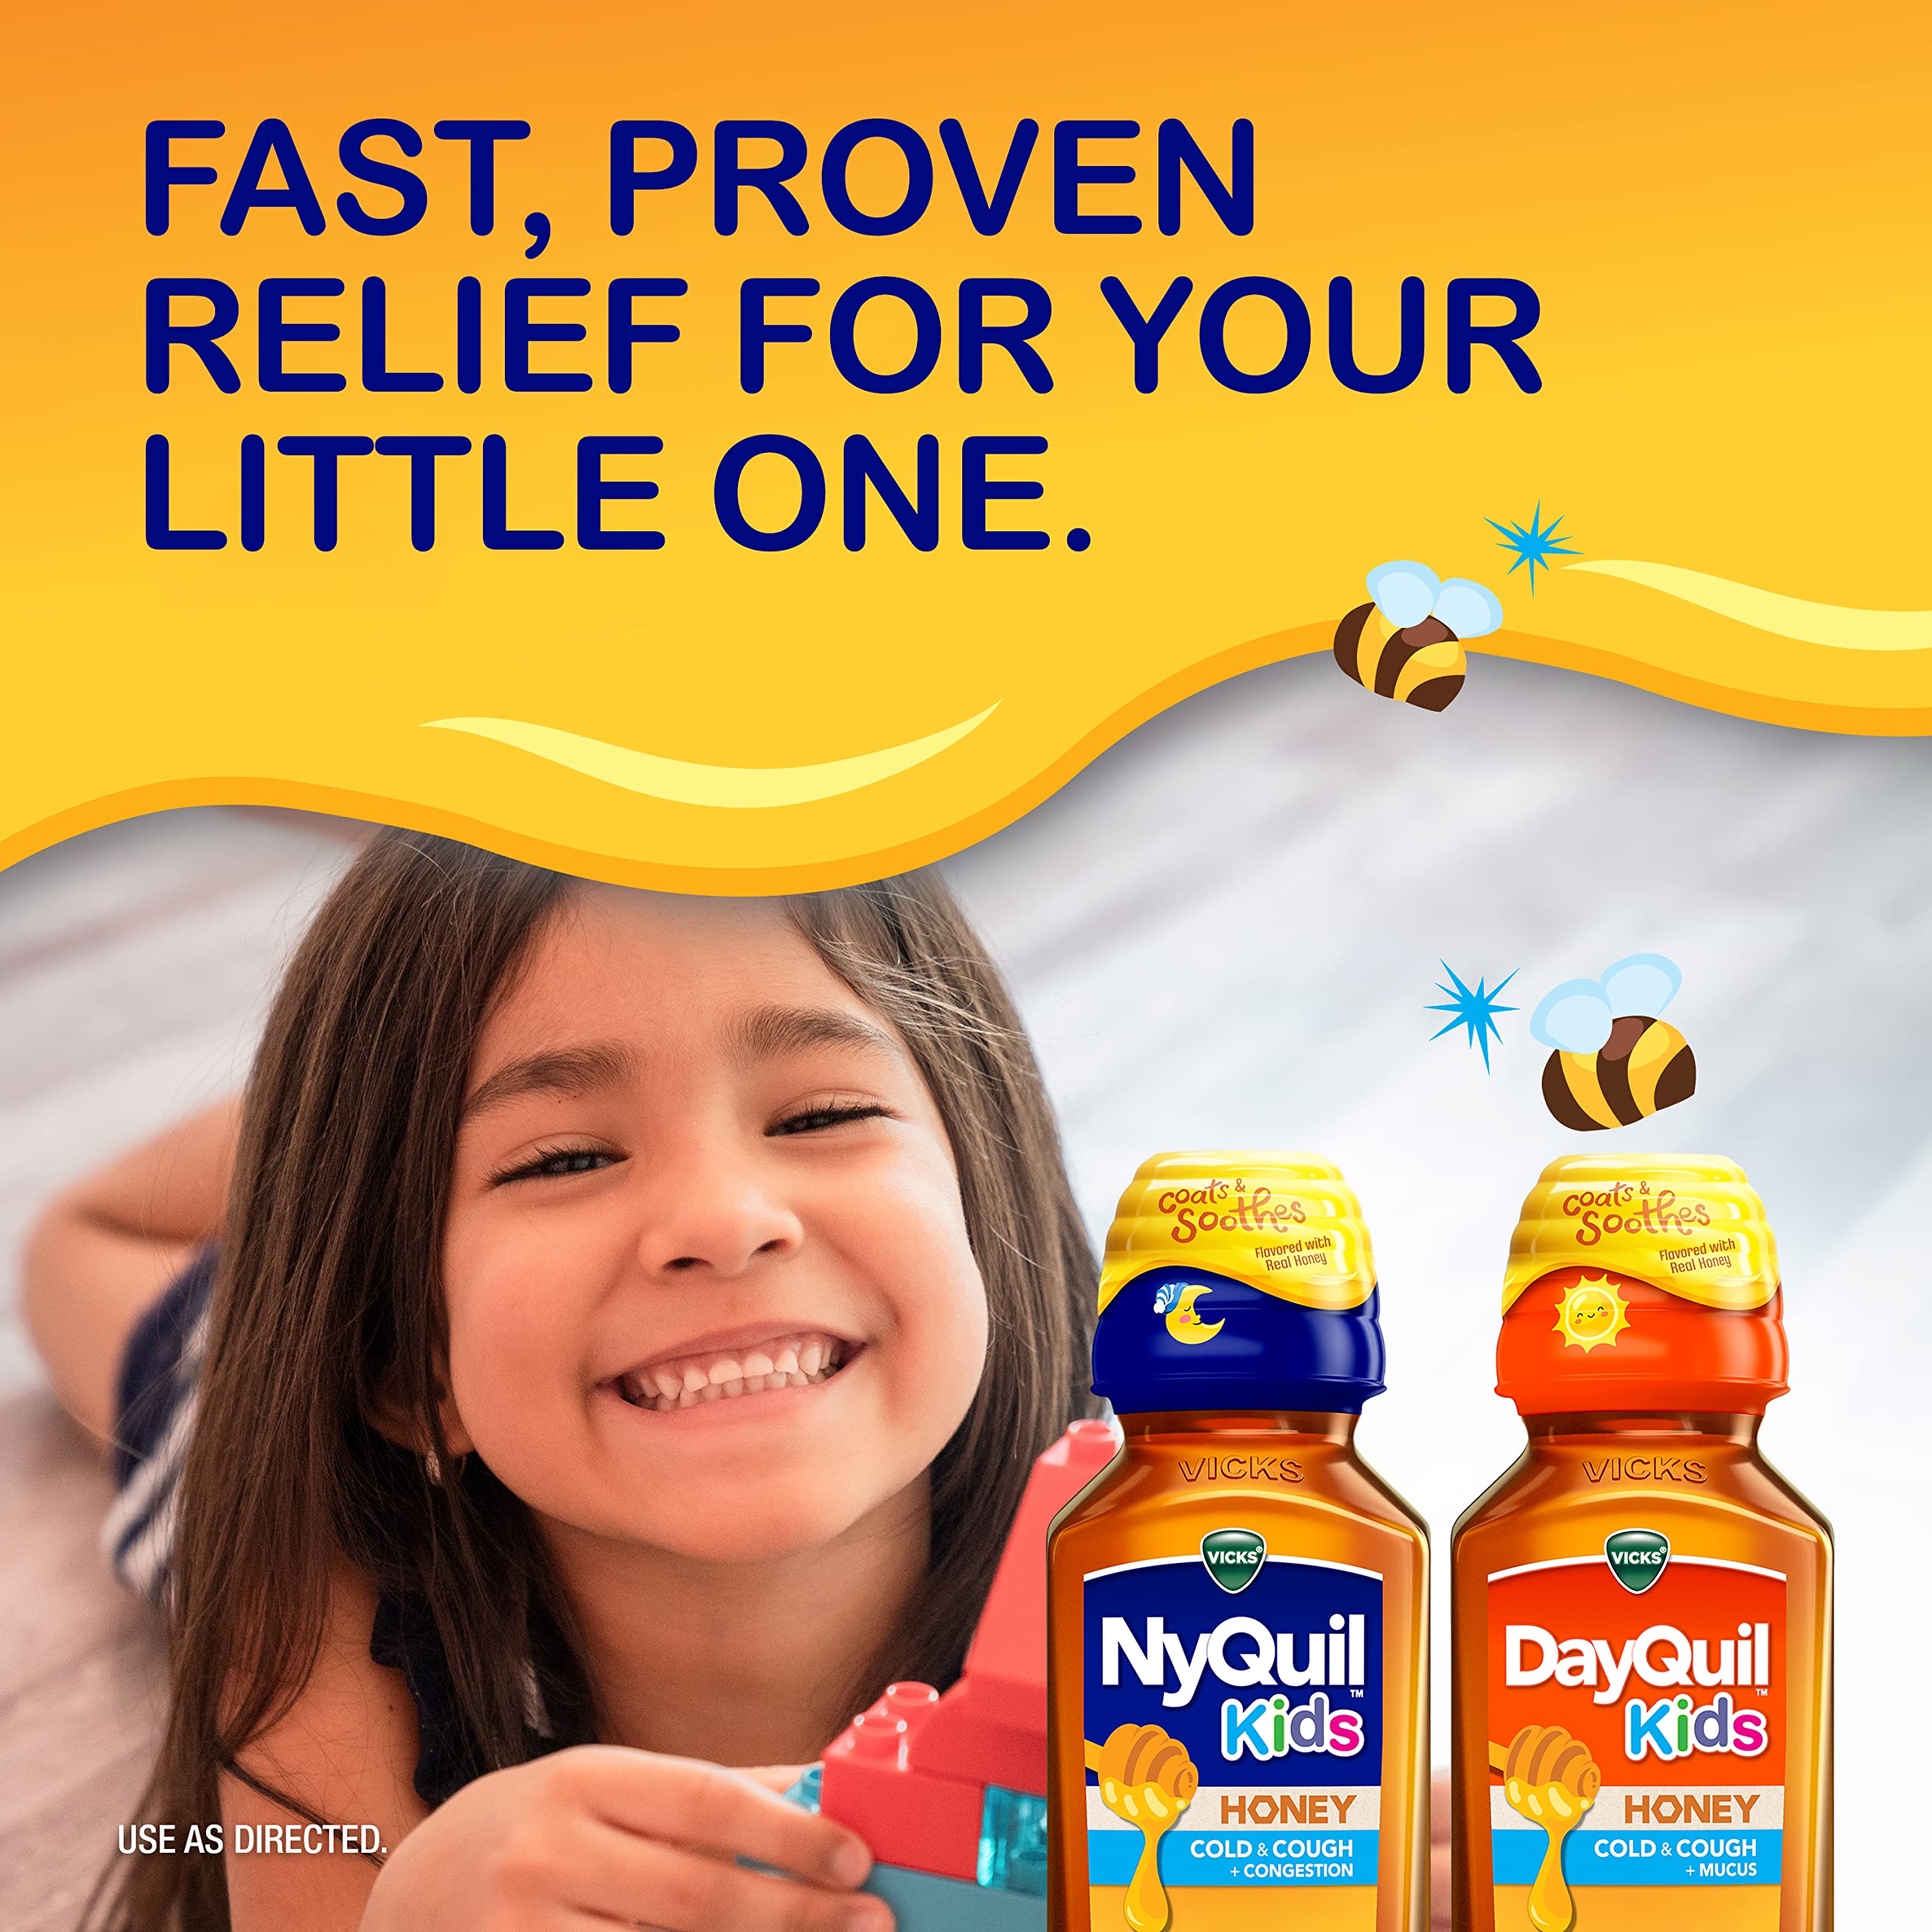 Vicks Kids NyQuil/DayQuil Honey Cold & Cough + Congestion Relief Combo Pack for Nighttime & Daytime Cough & Congestion, Flavored with Real Honey, for Children Ages 6+, 8 FL OZ NyQuil, 8 FL OZ DayQuil